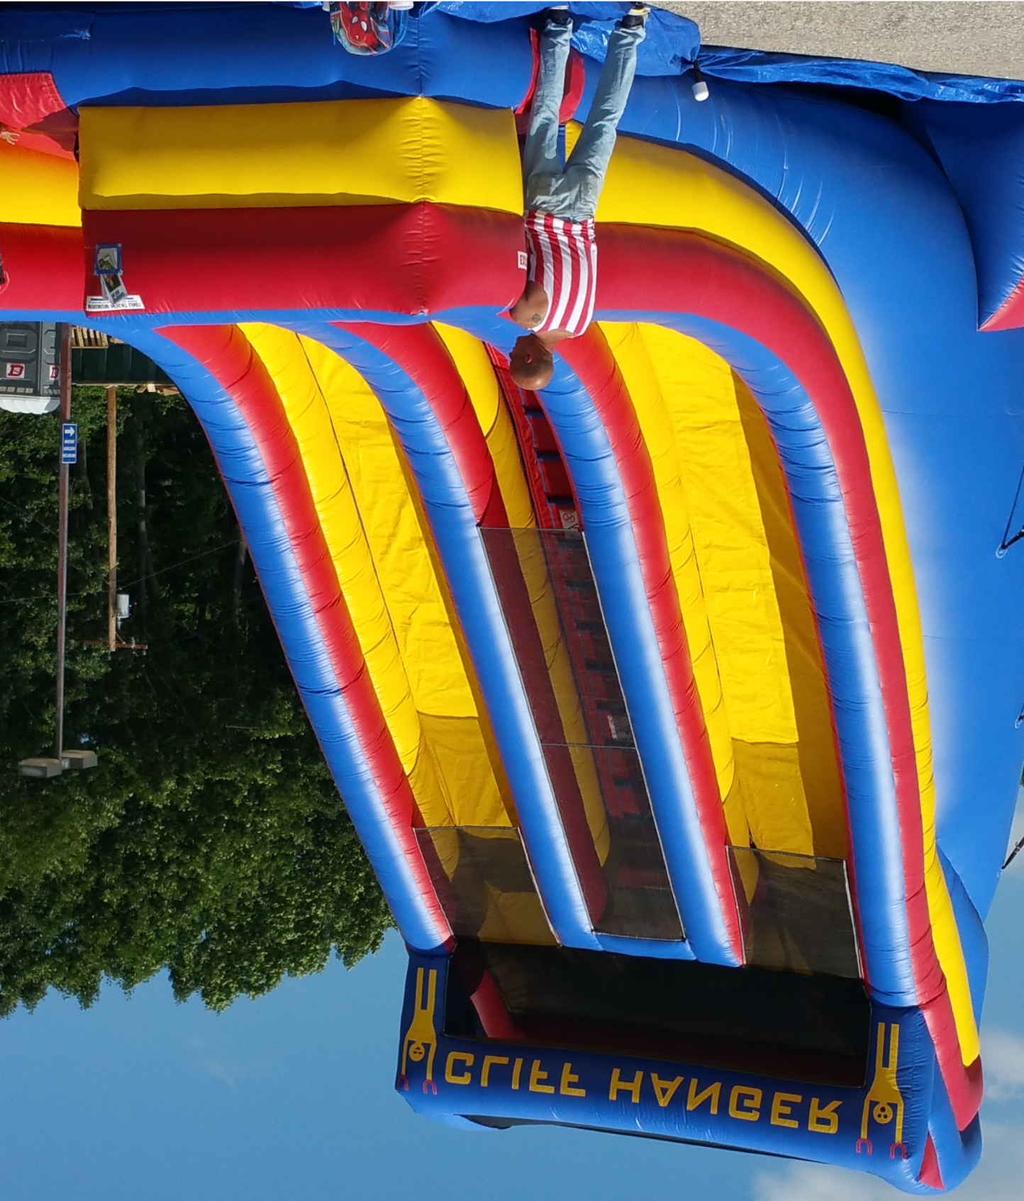 27' Cliff Hanger Inflatable Slide Standing almost three stories tall, this two-lane slide is sure to thrill!